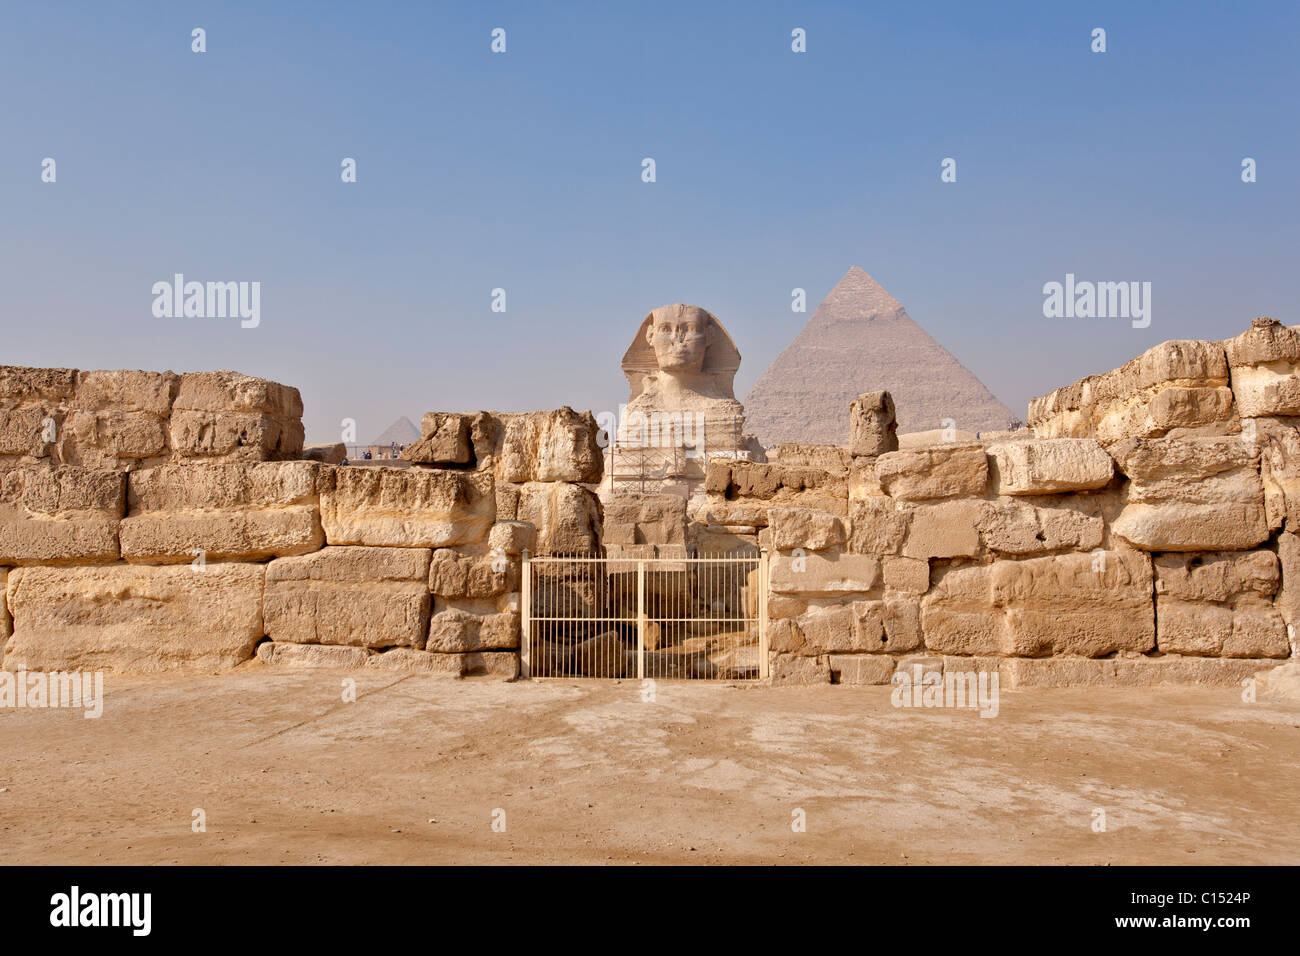 The morning smoke clears to view both the Sphinx and the Pyramid of Khafre (Chephren) in Giza, Egypt Stock Photo